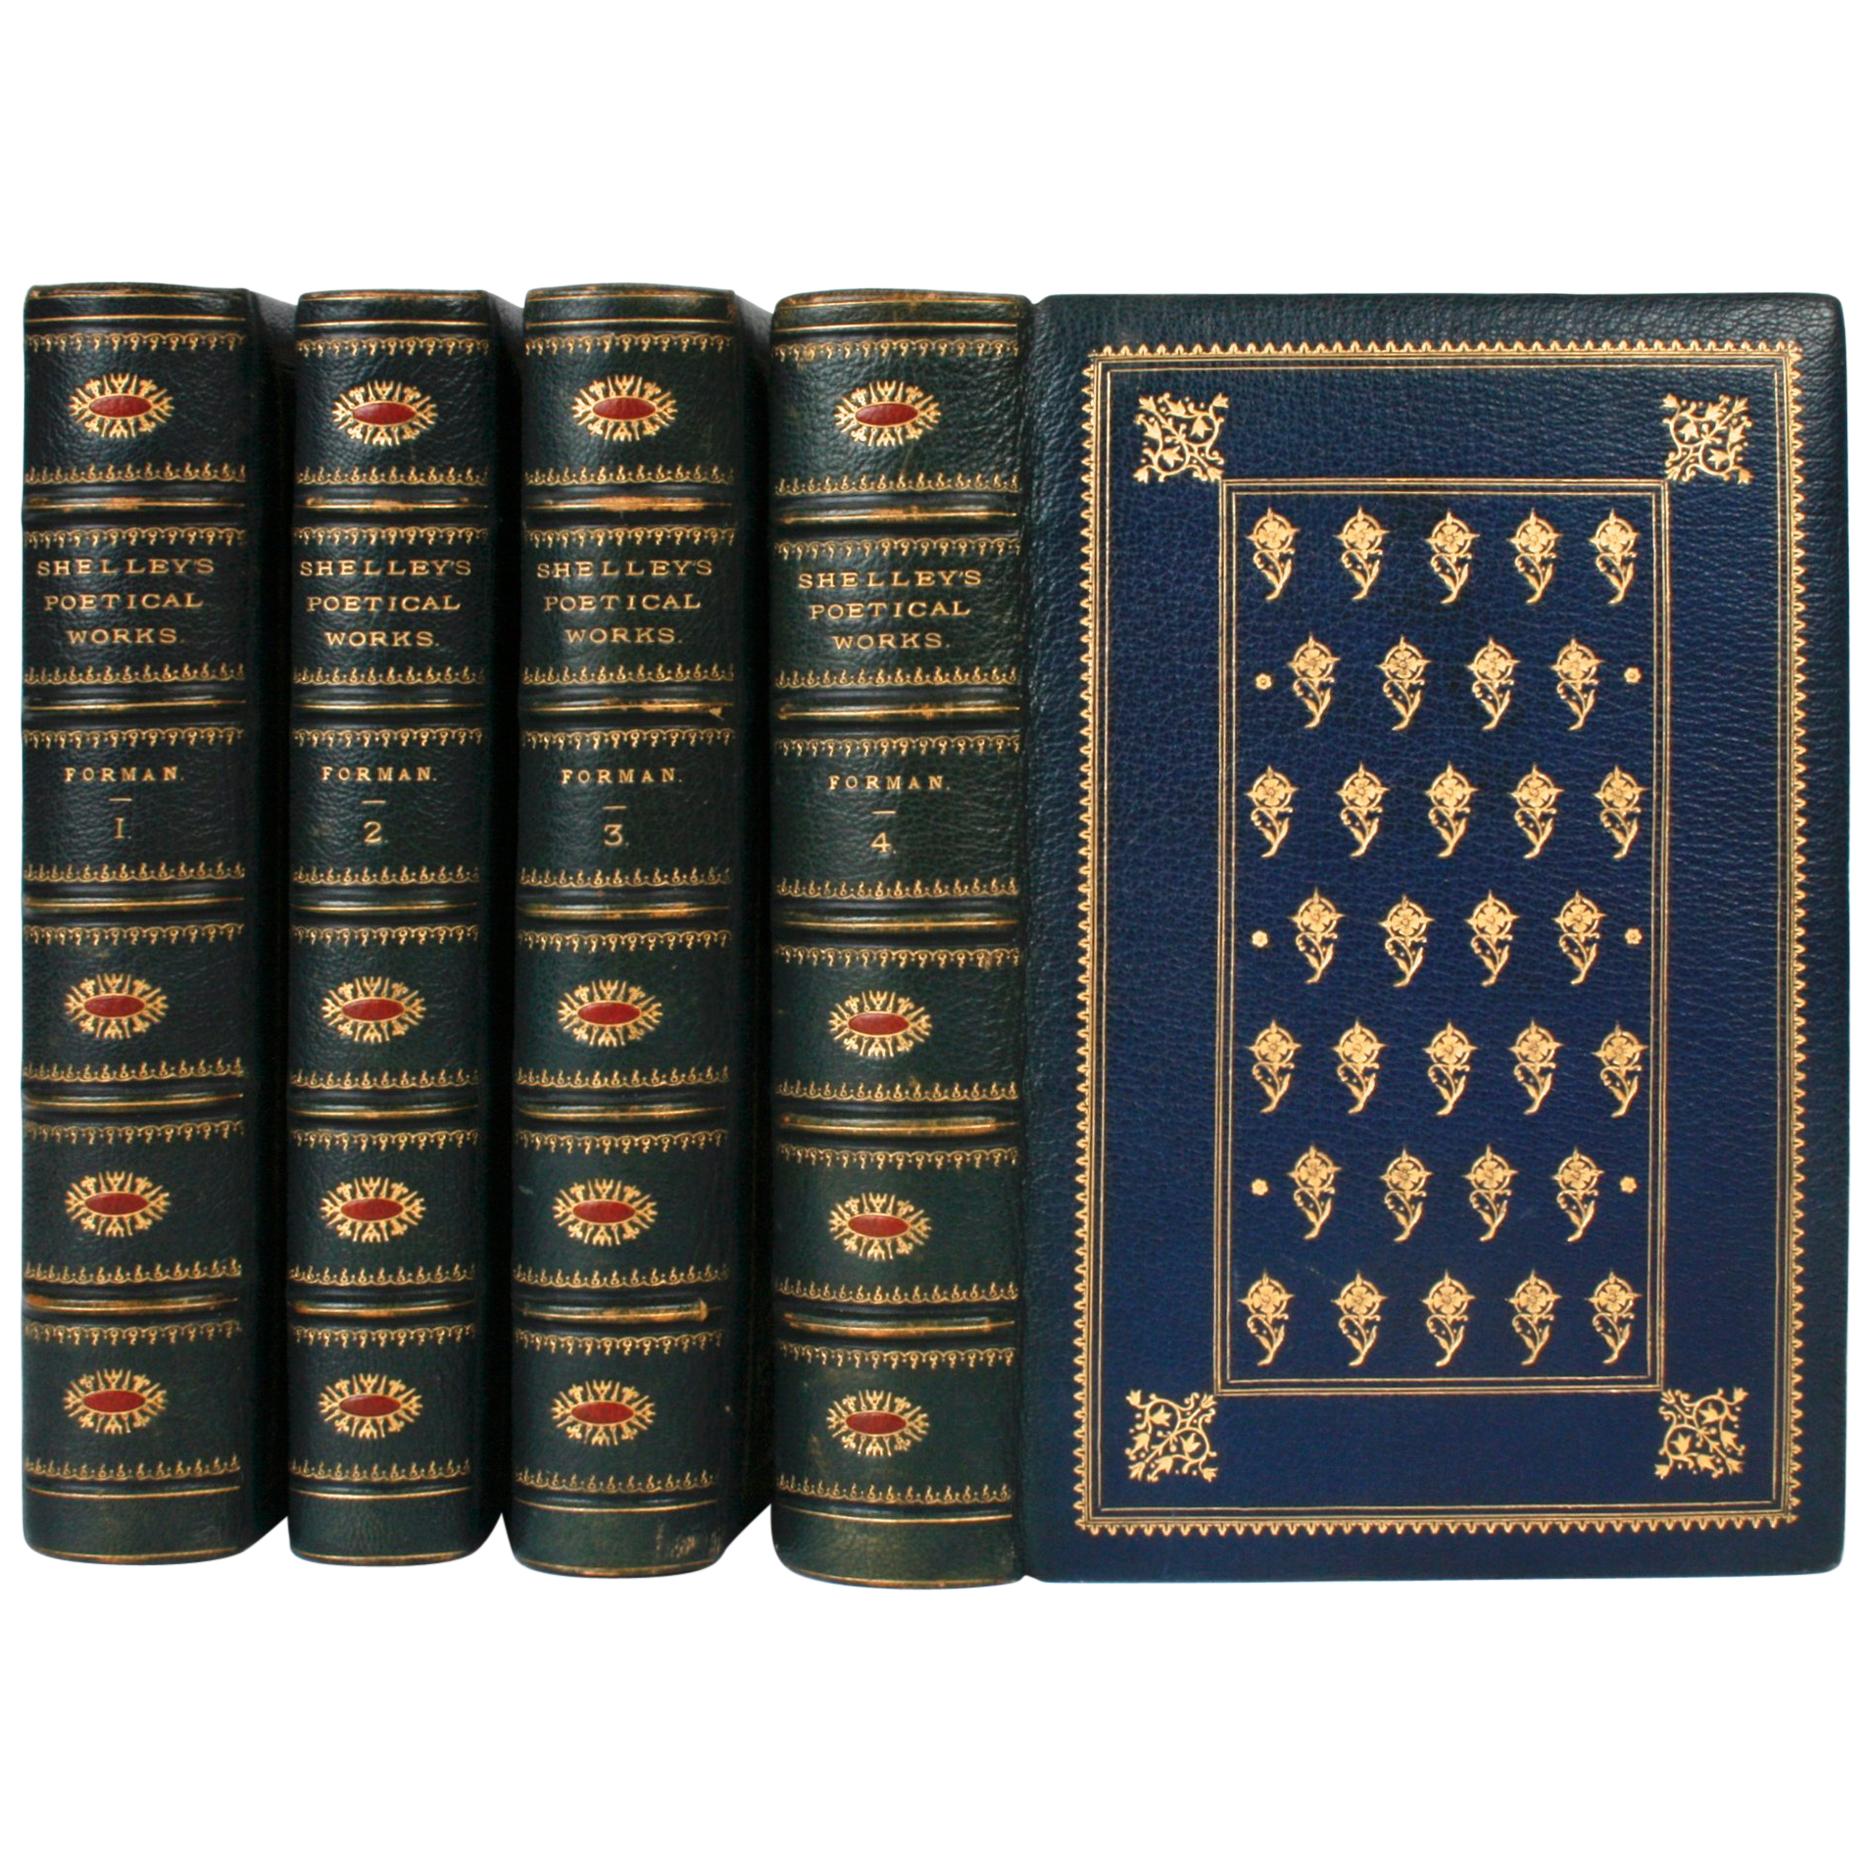 Poetical Works of Percy Bysshe Shelley with Harrison & Son Binding